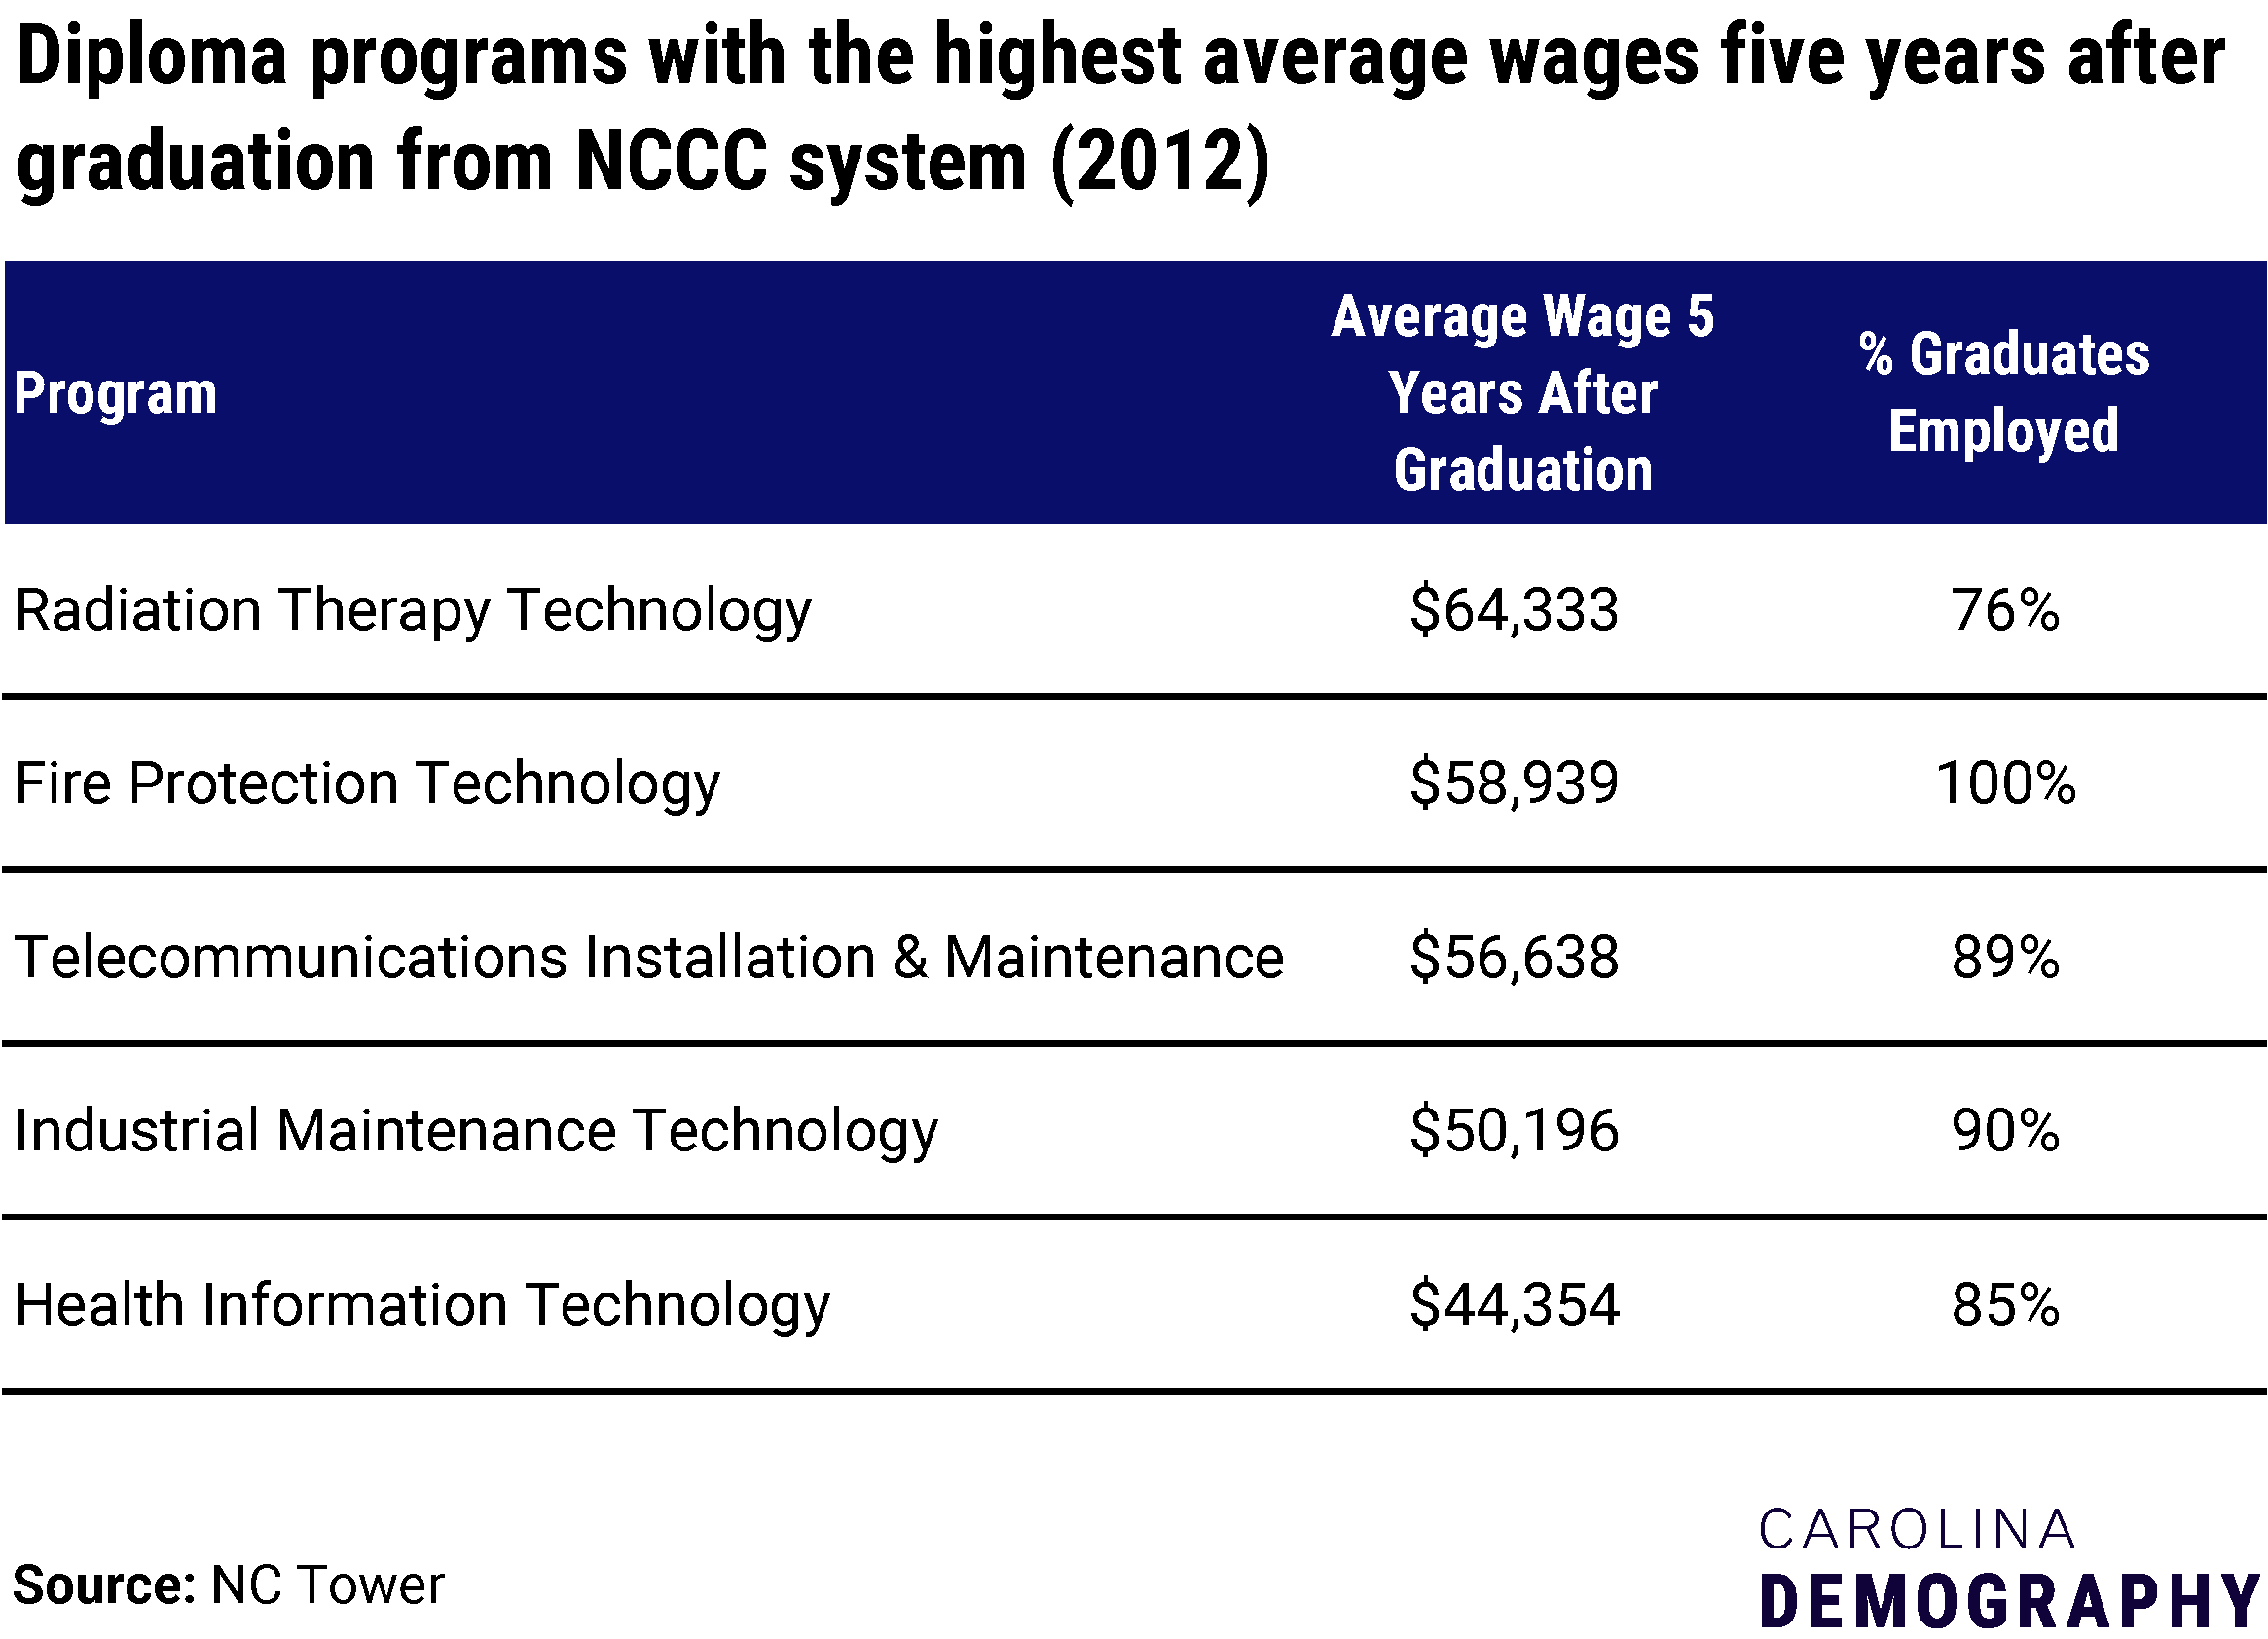 Diploma program graduates with the highest average wages five years after graduation, NCCC system schools (2012)